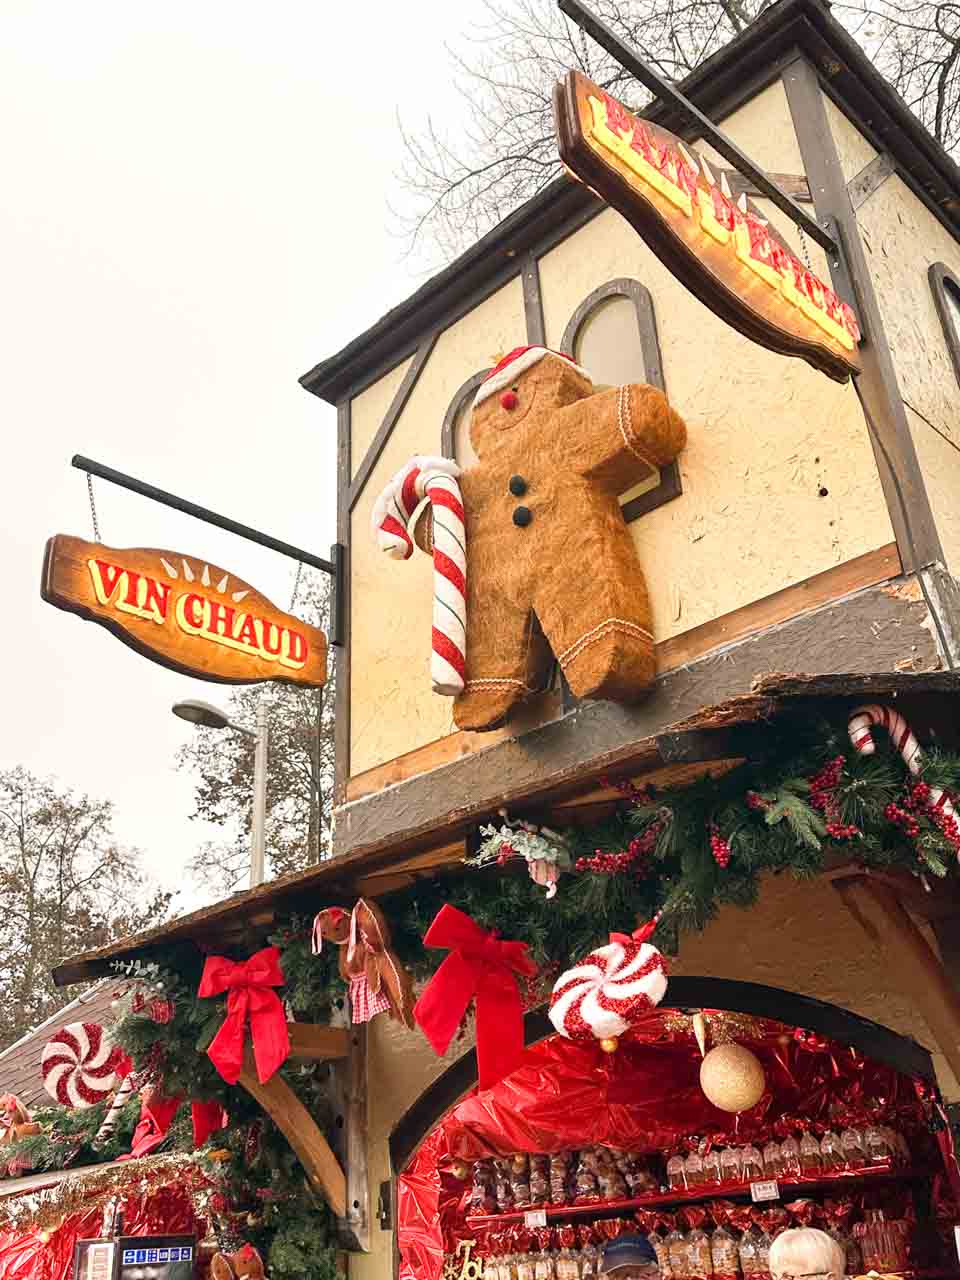 A large gingerbread man decoration hanging on the wall of a 'Vin Chaud' (hot wine) stall at a Christmas market in Colmar